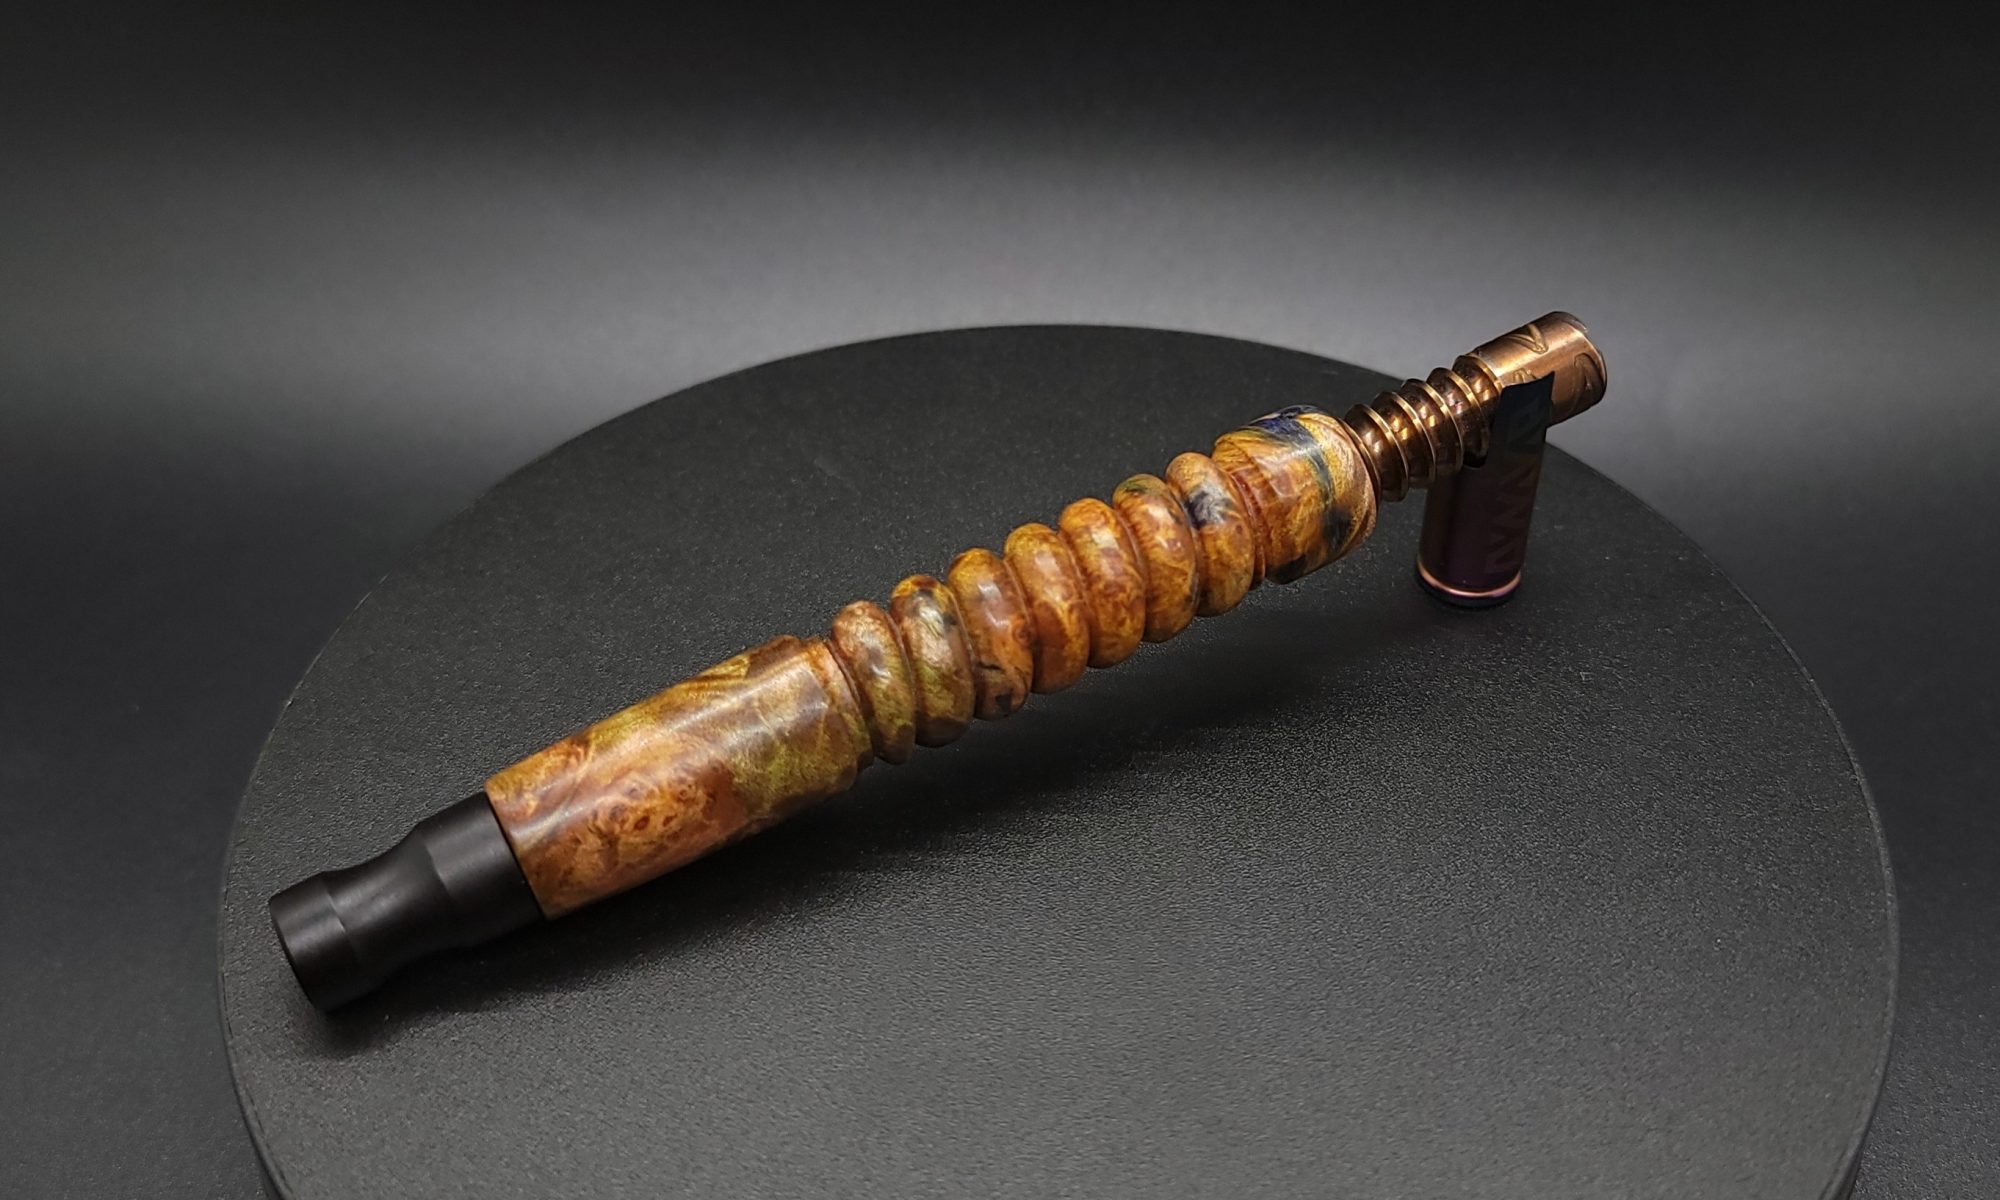 This image portrays Twisted Stems Series-Maple Burl-XL Dynavap Stem by Dovetail Woodwork.